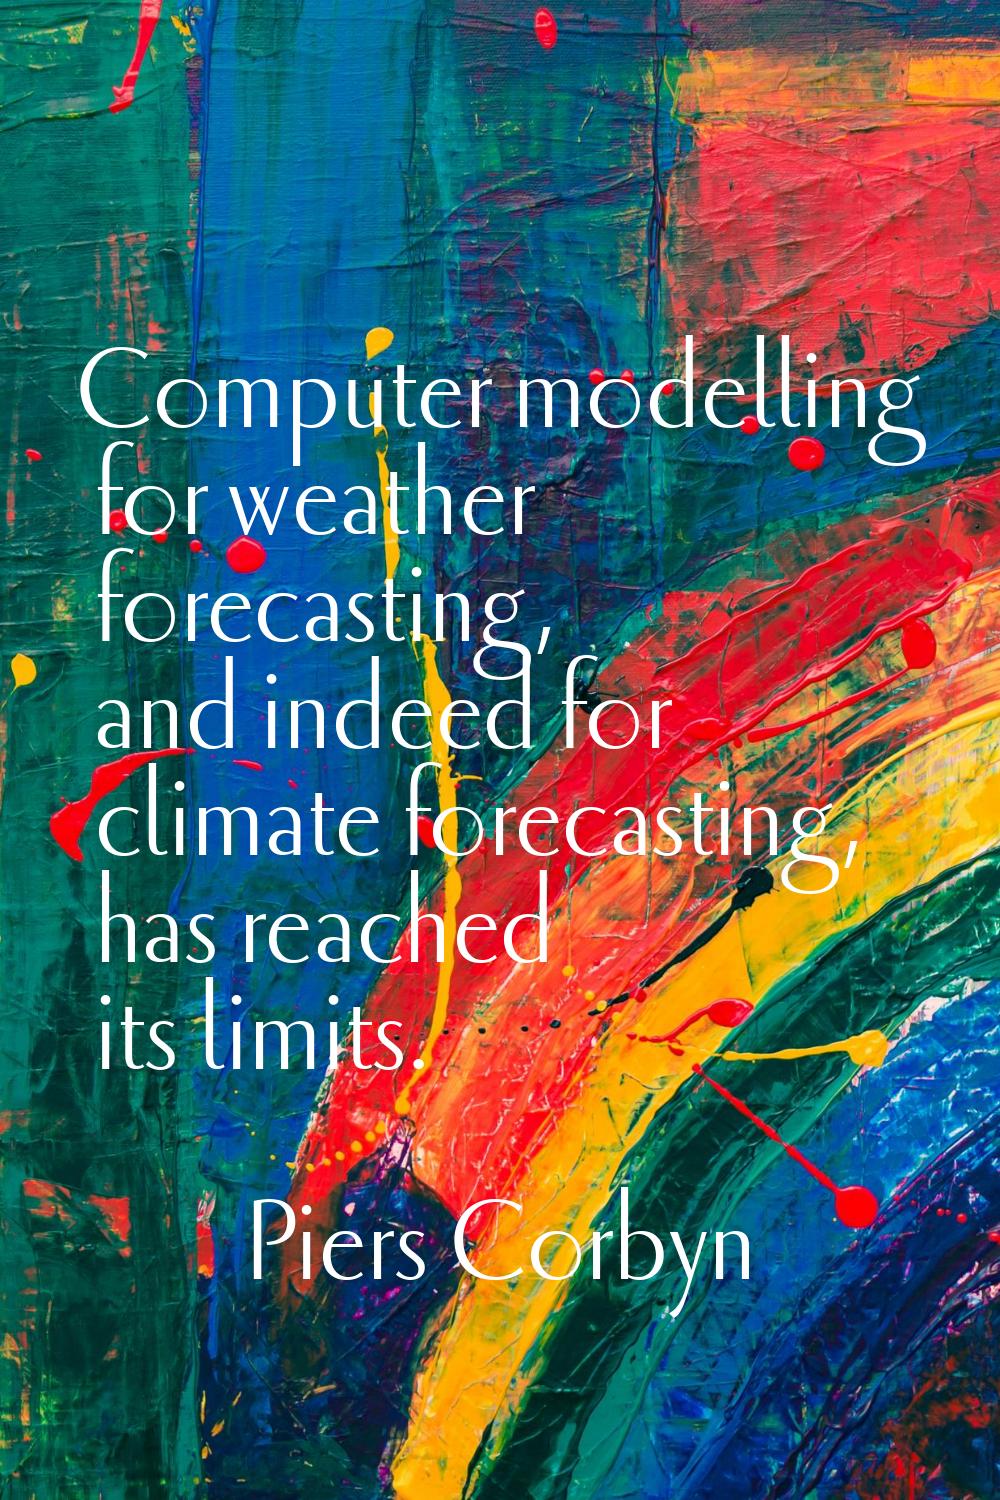 Computer modelling for weather forecasting, and indeed for climate forecasting, has reached its lim